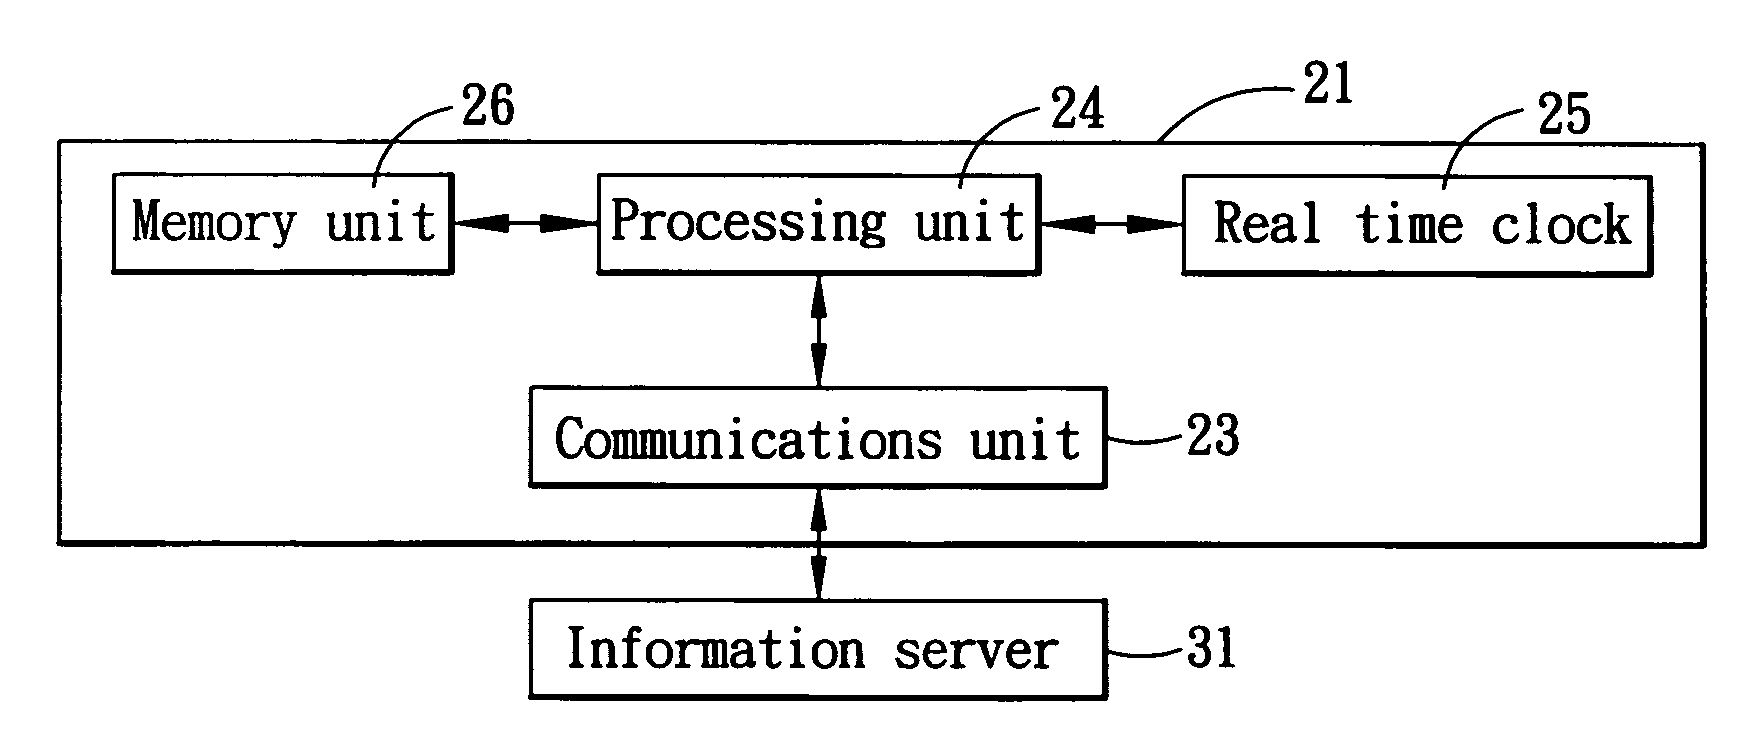 Method for acquiring information, and hand-held mobile communications device for implementing the method